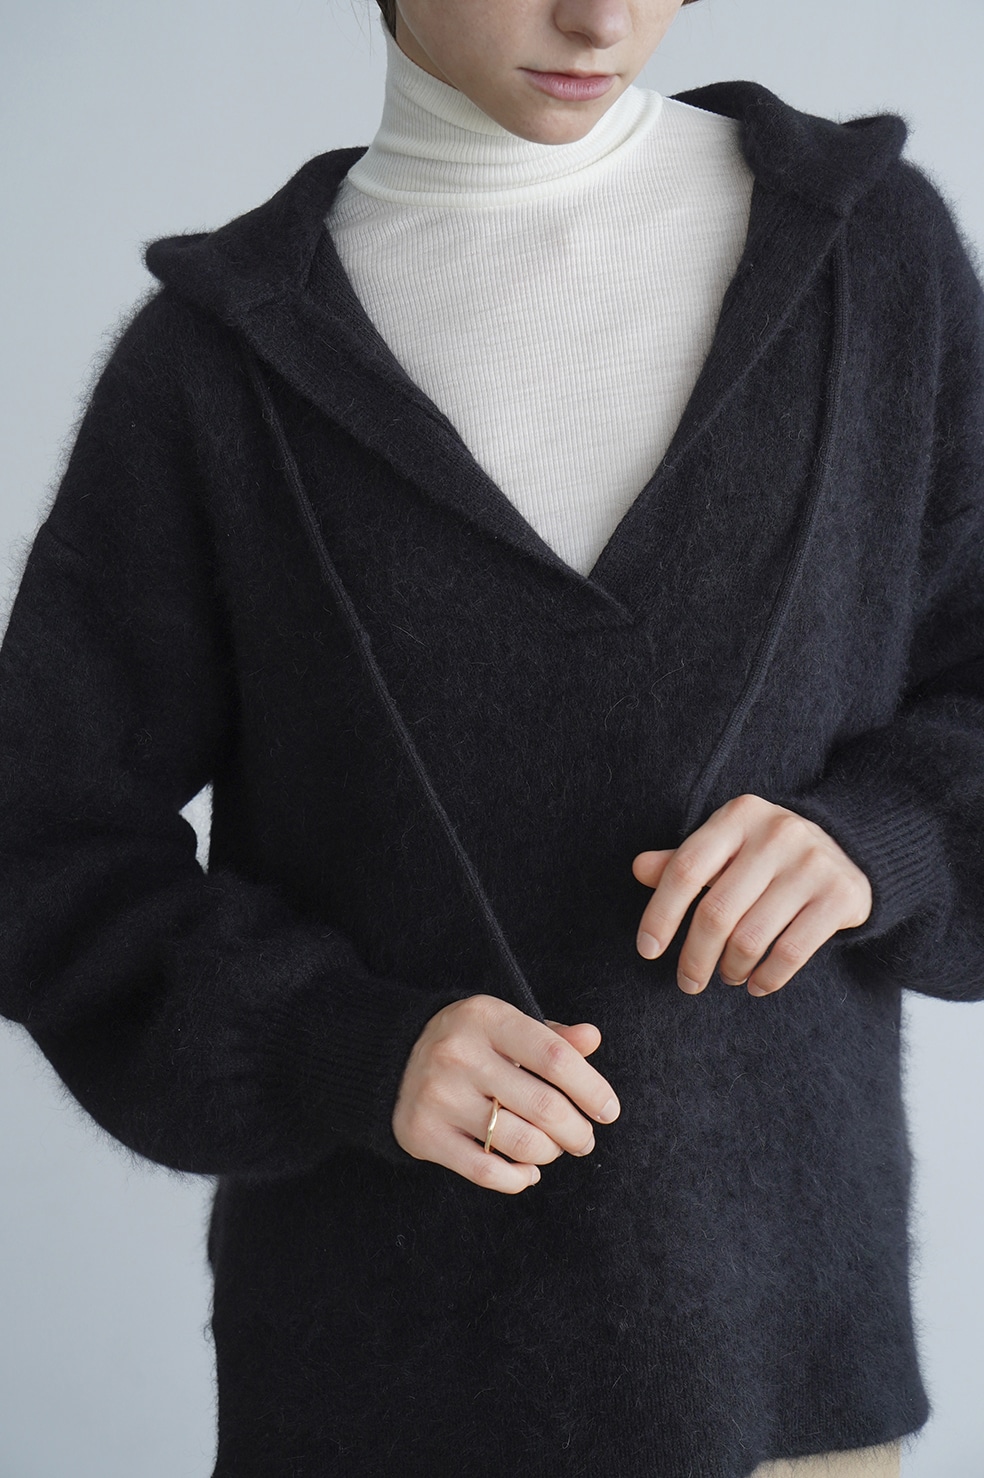 CLANE ANGOLA OVER KNIT HOODIE | CLANE ANGORA OVER KNIT HOODIE